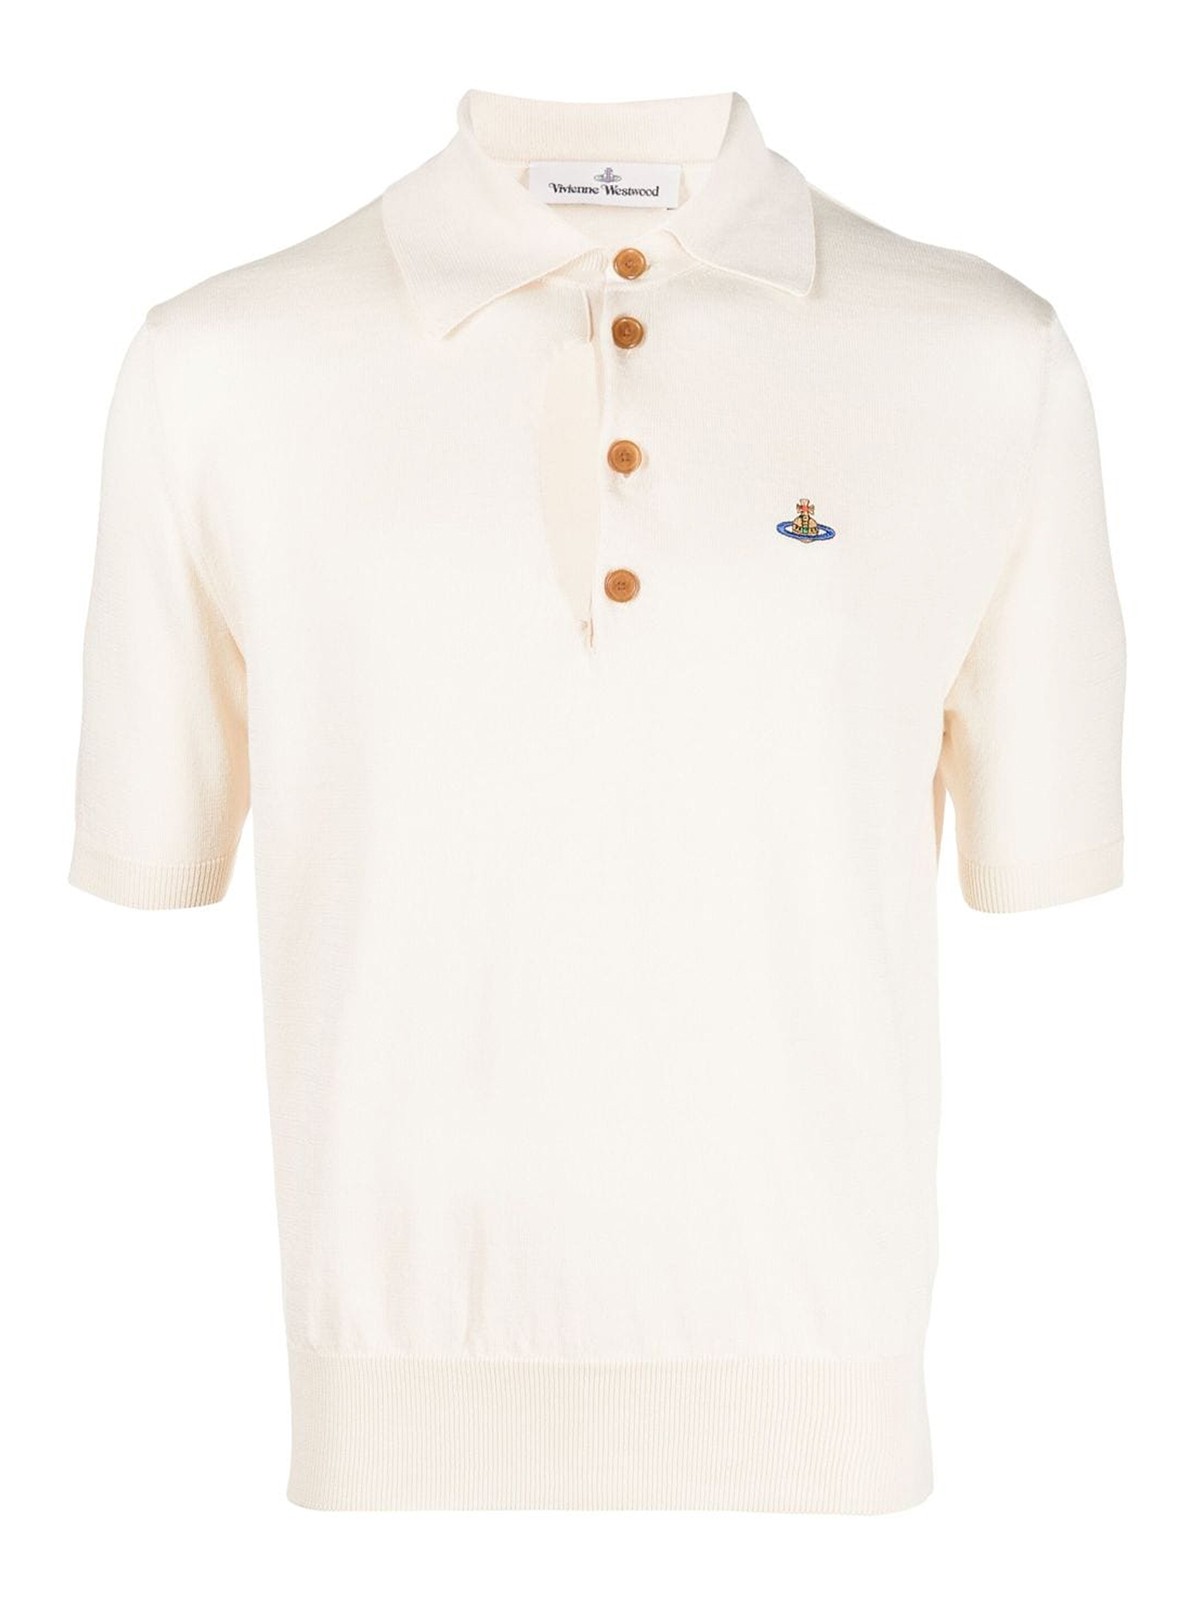 Vivienne Westwood Logo Polo Shirt In White